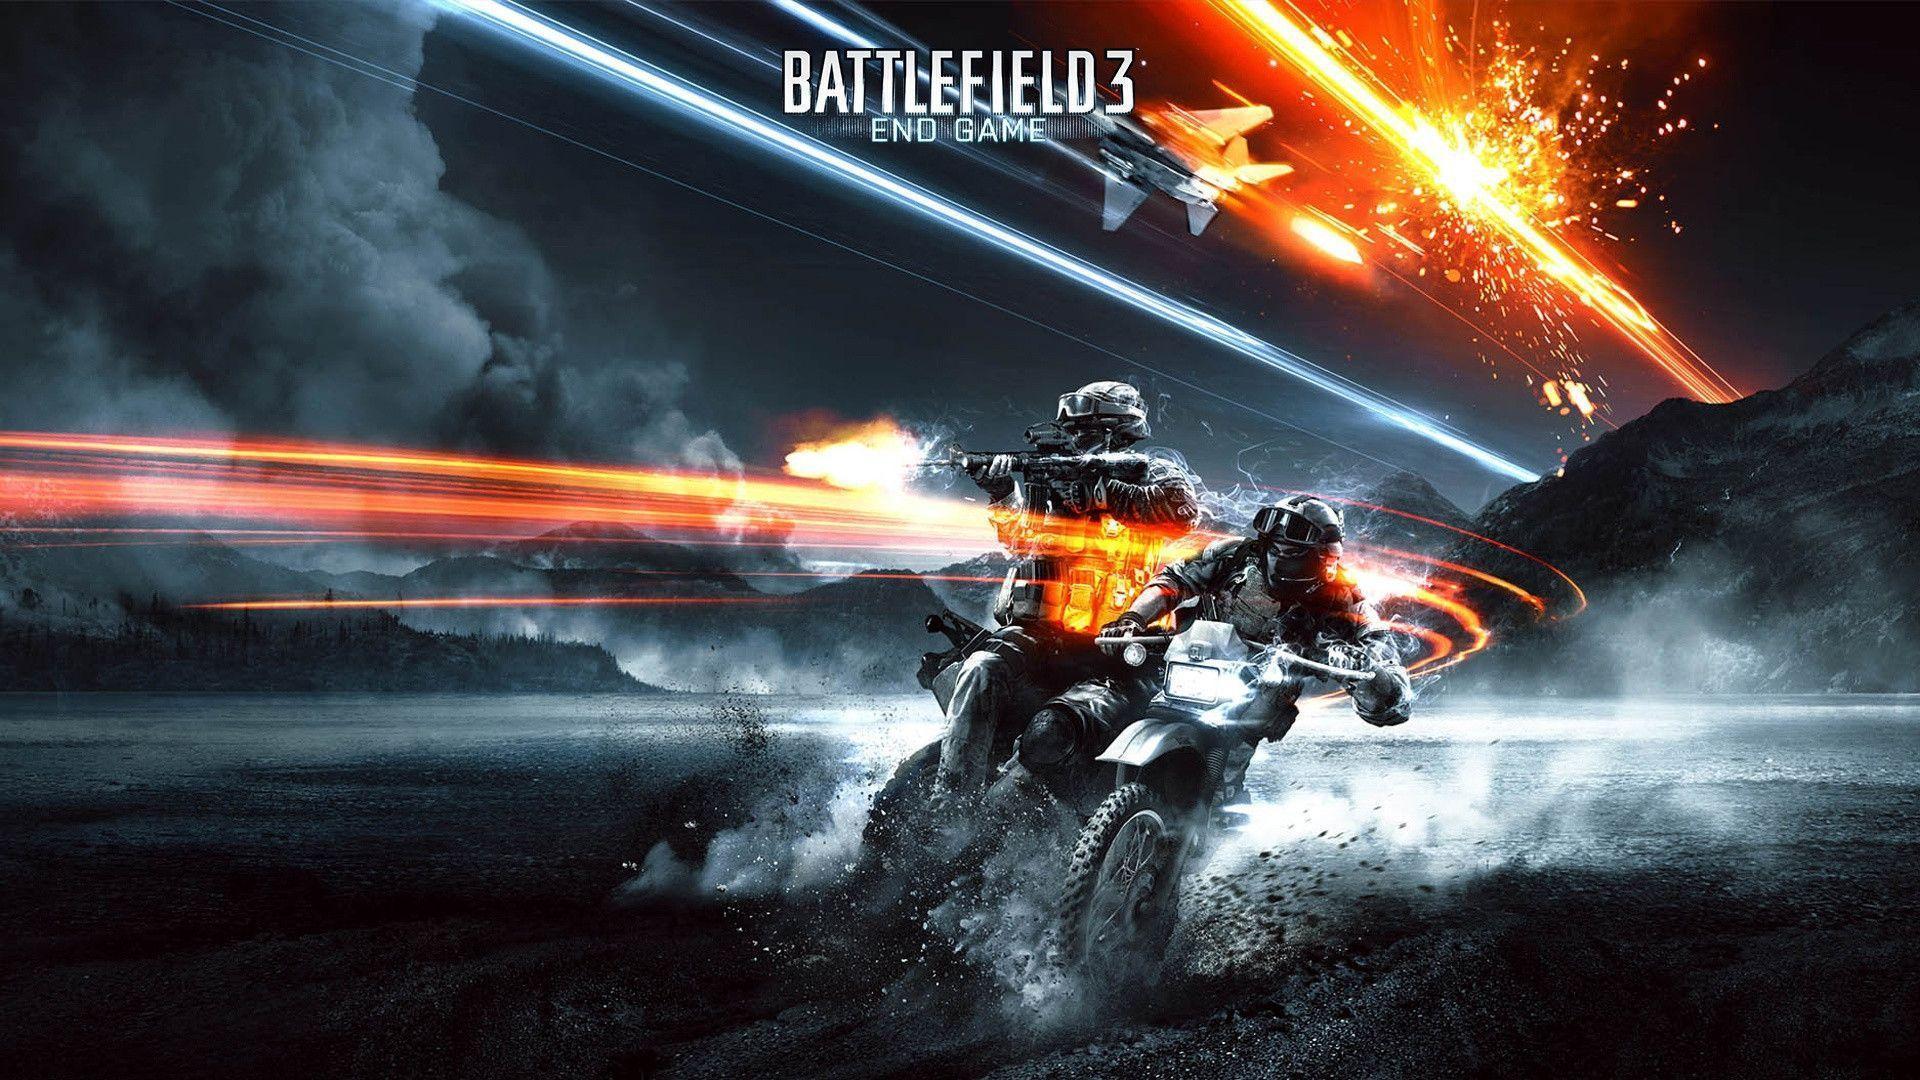 1920x1080 Battlefield 3 end game Wallpapers